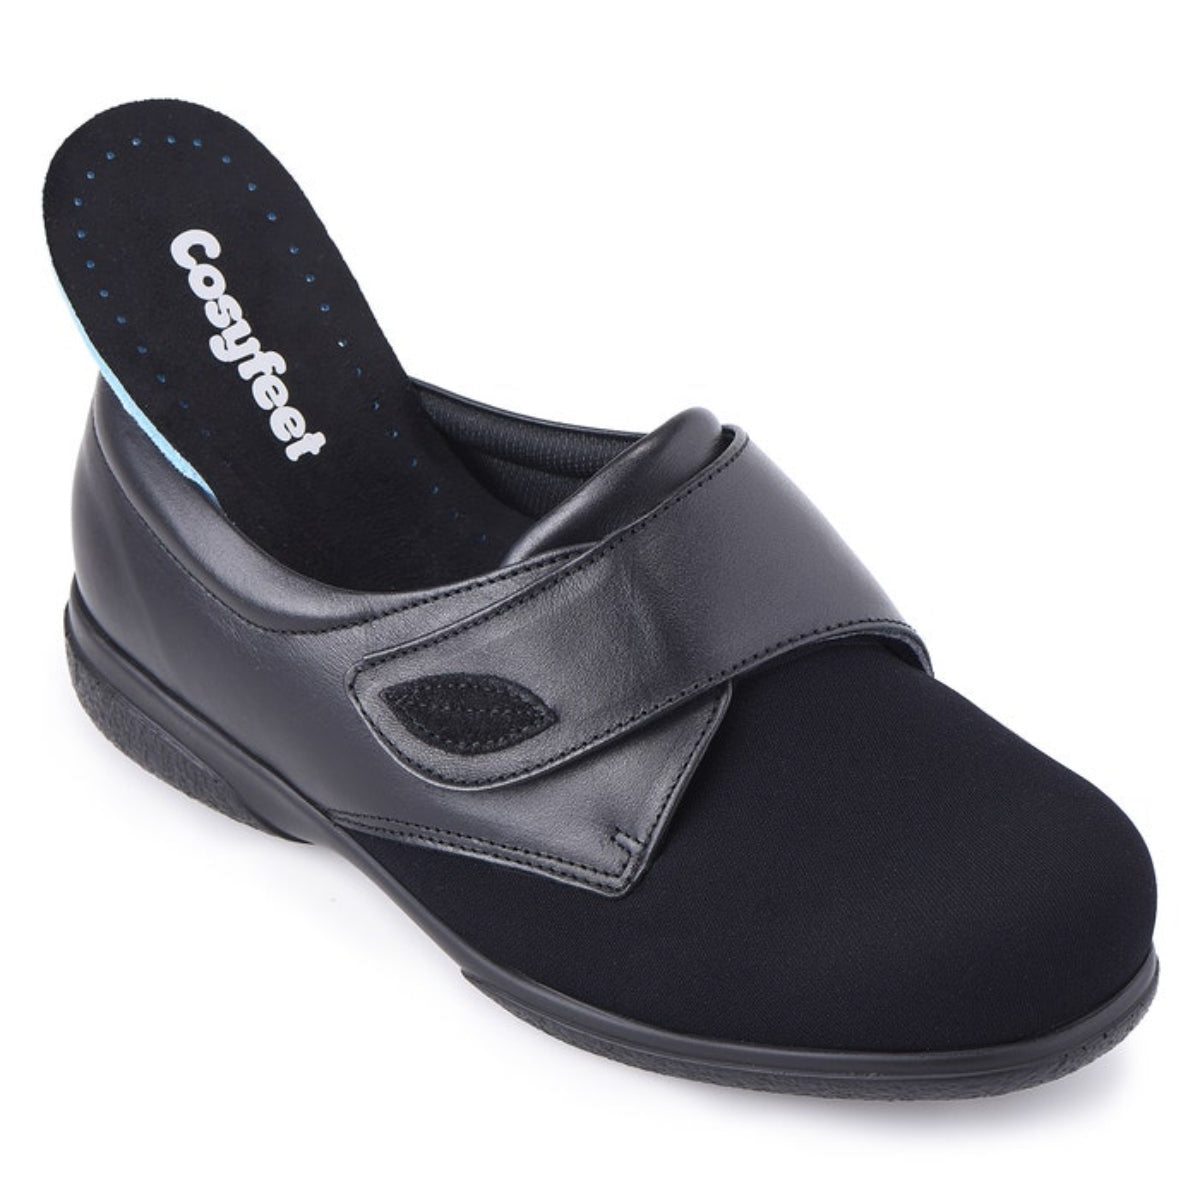 Our stretchy shoe for swollen or misshapen feet